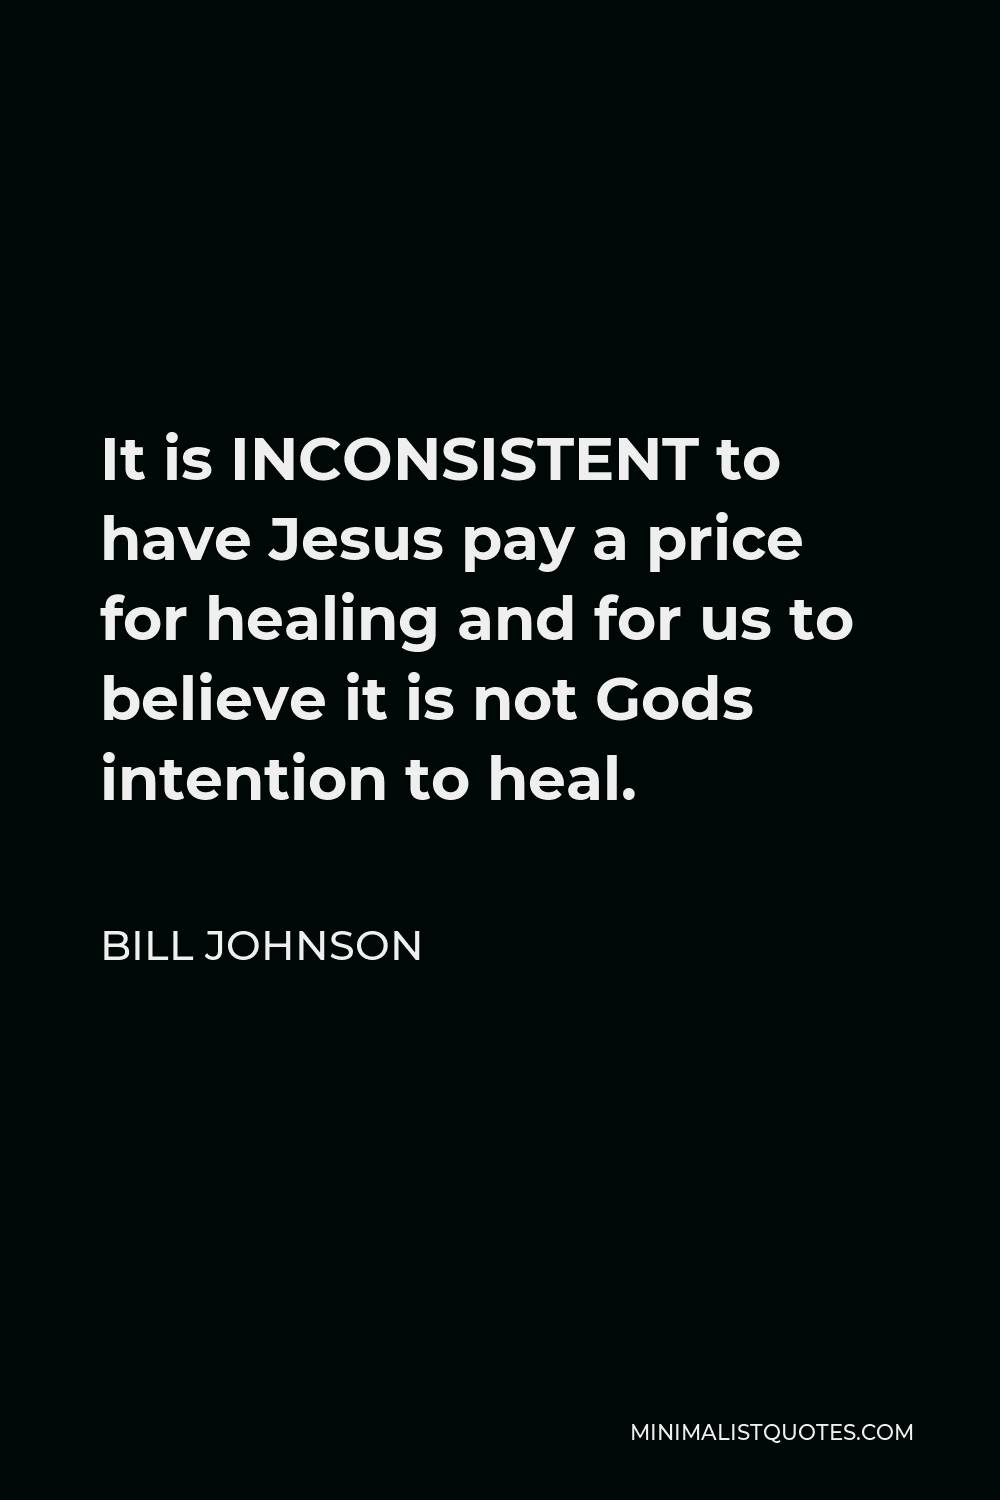 Bill Johnson Quote - It is INCONSISTENT to have Jesus pay a price for healing and for us to believe it is not Gods intention to heal.